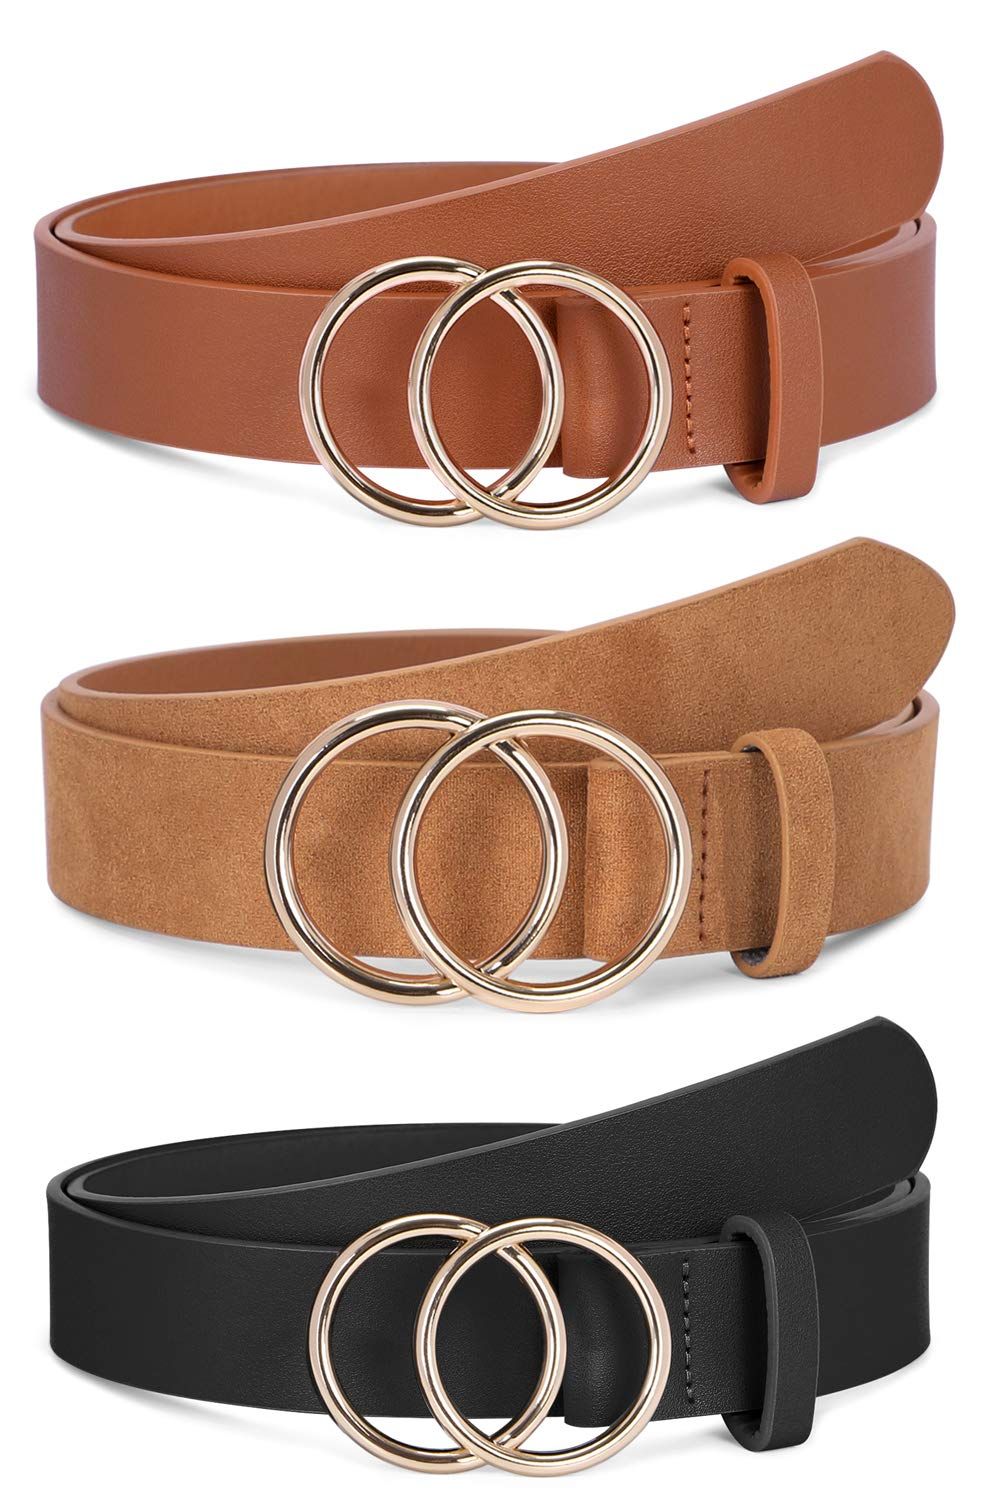 3 Pack Women Leather Belts Faux Leather Jeans Belt with Double O Ring Buckle | Amazon (US)